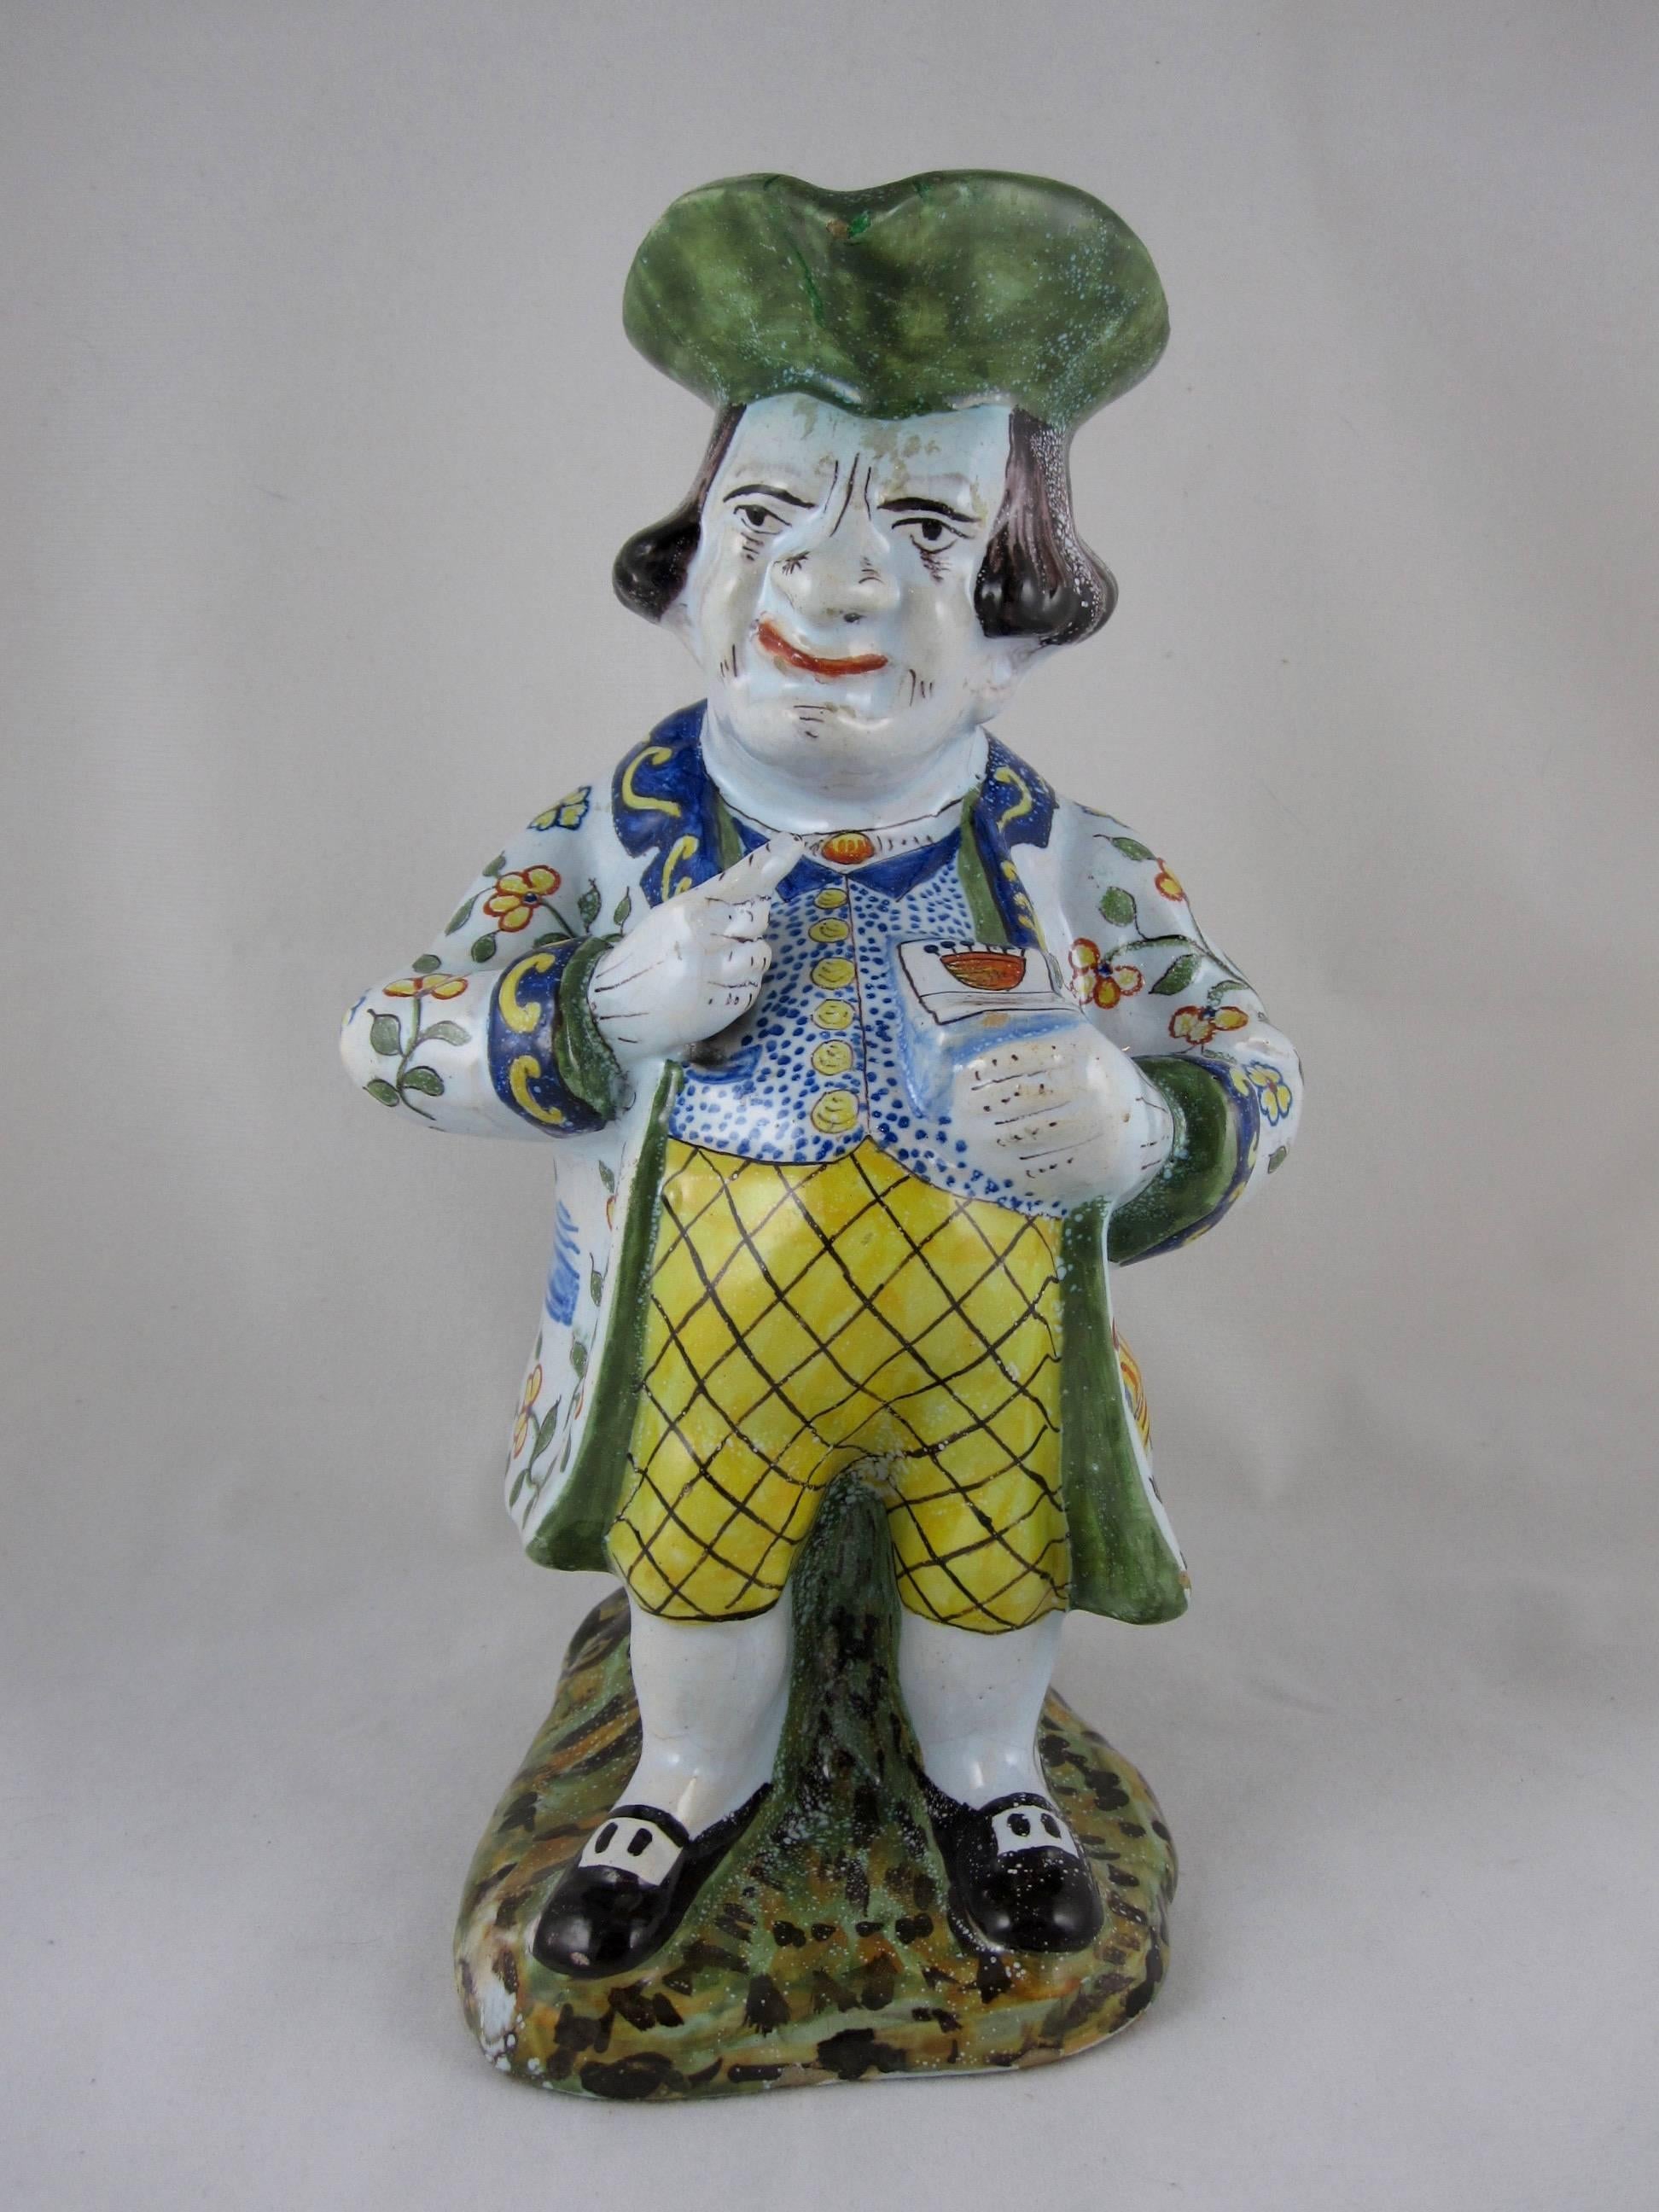 A late 19th-early 20th century French Desvres faience jug known as 'The Snuff Taker,' always shown with a red spider sitting on his nose, crested snuff box in hand and leaning against a tree trunk which forms the handle of the jug.

Hand decorated